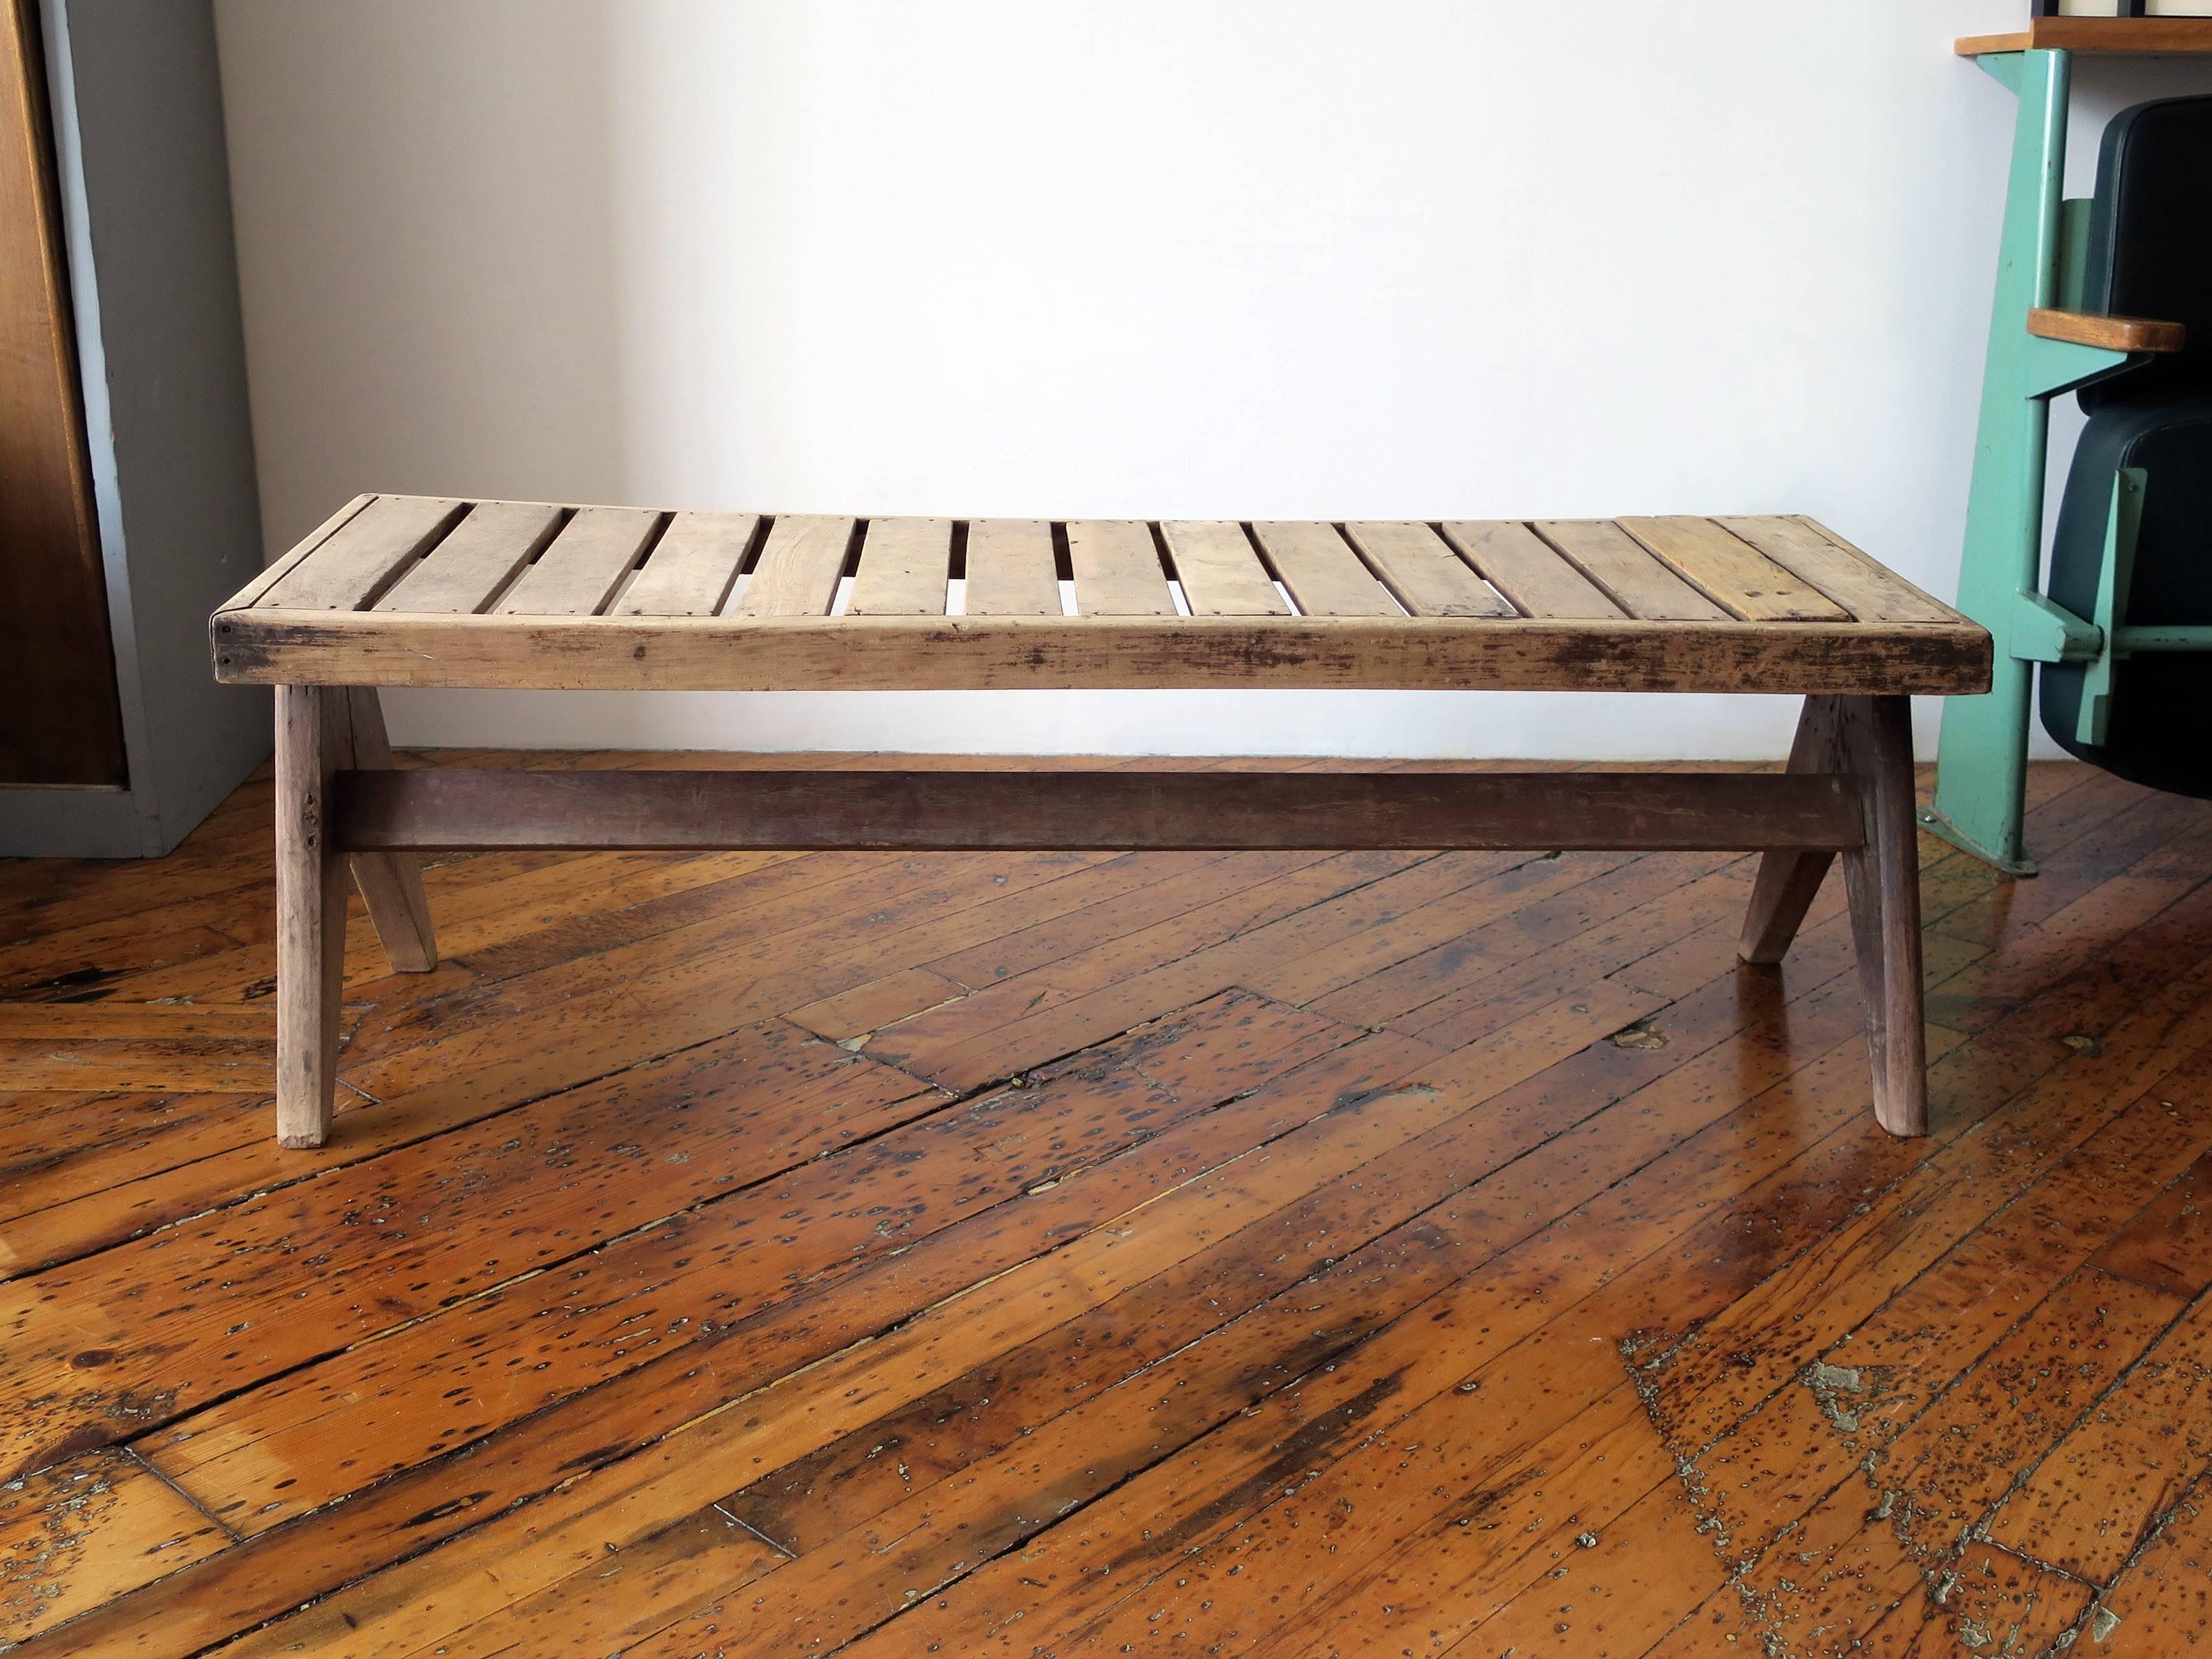 Original, sun bleached teak Pierre Jeanneret bench from Chandigarh. One slat appears to be an old replacement and some minor repairs, executed over the decades, are visible.